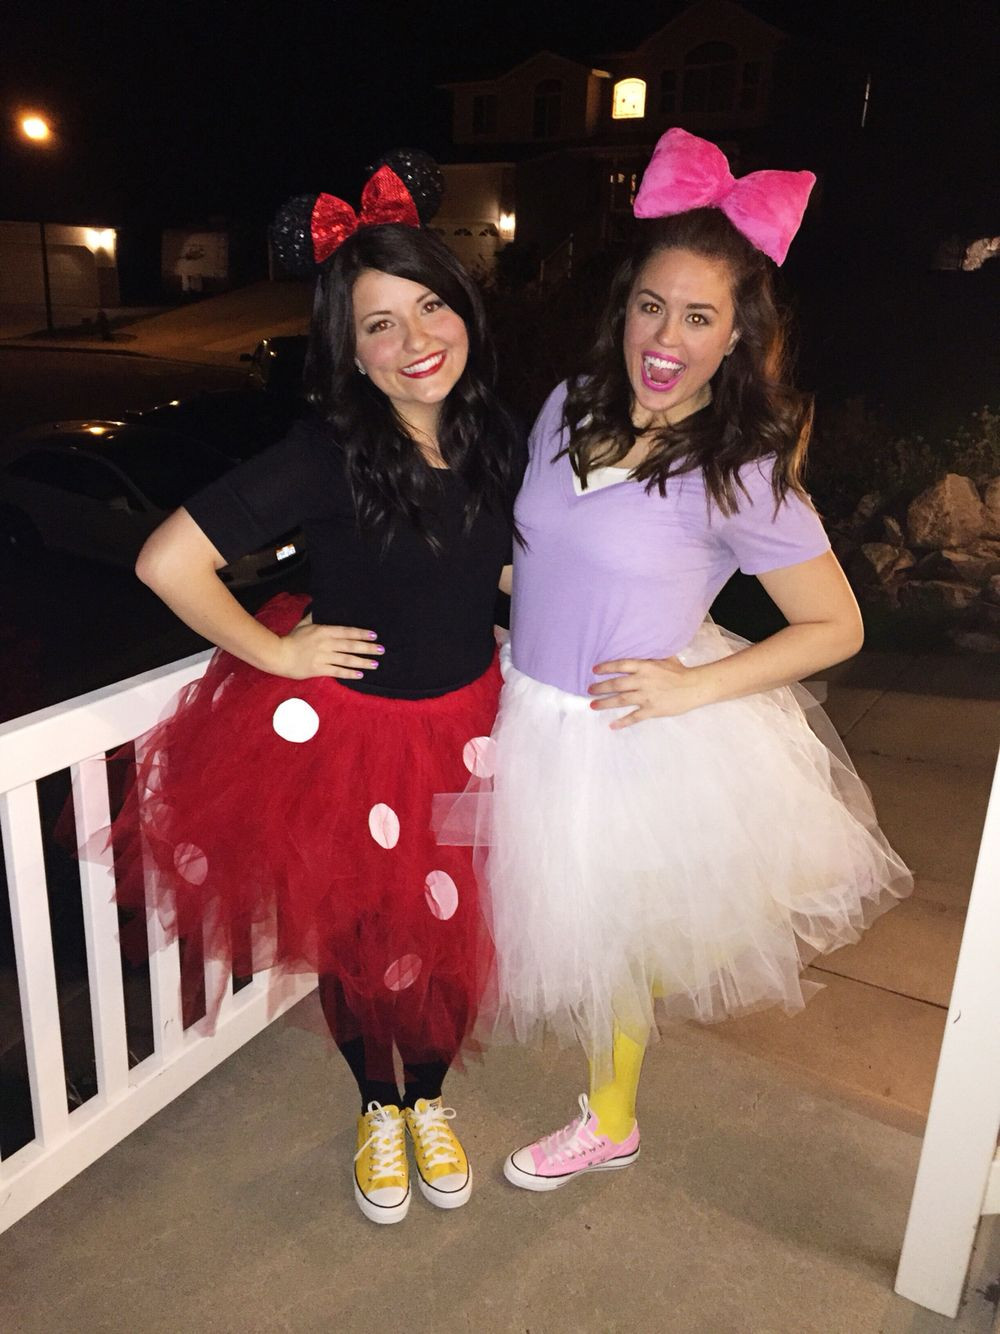 Best Friend Halloween Costumes Diy
 Minnie Mouse and Daisy Duck Best friend costumes